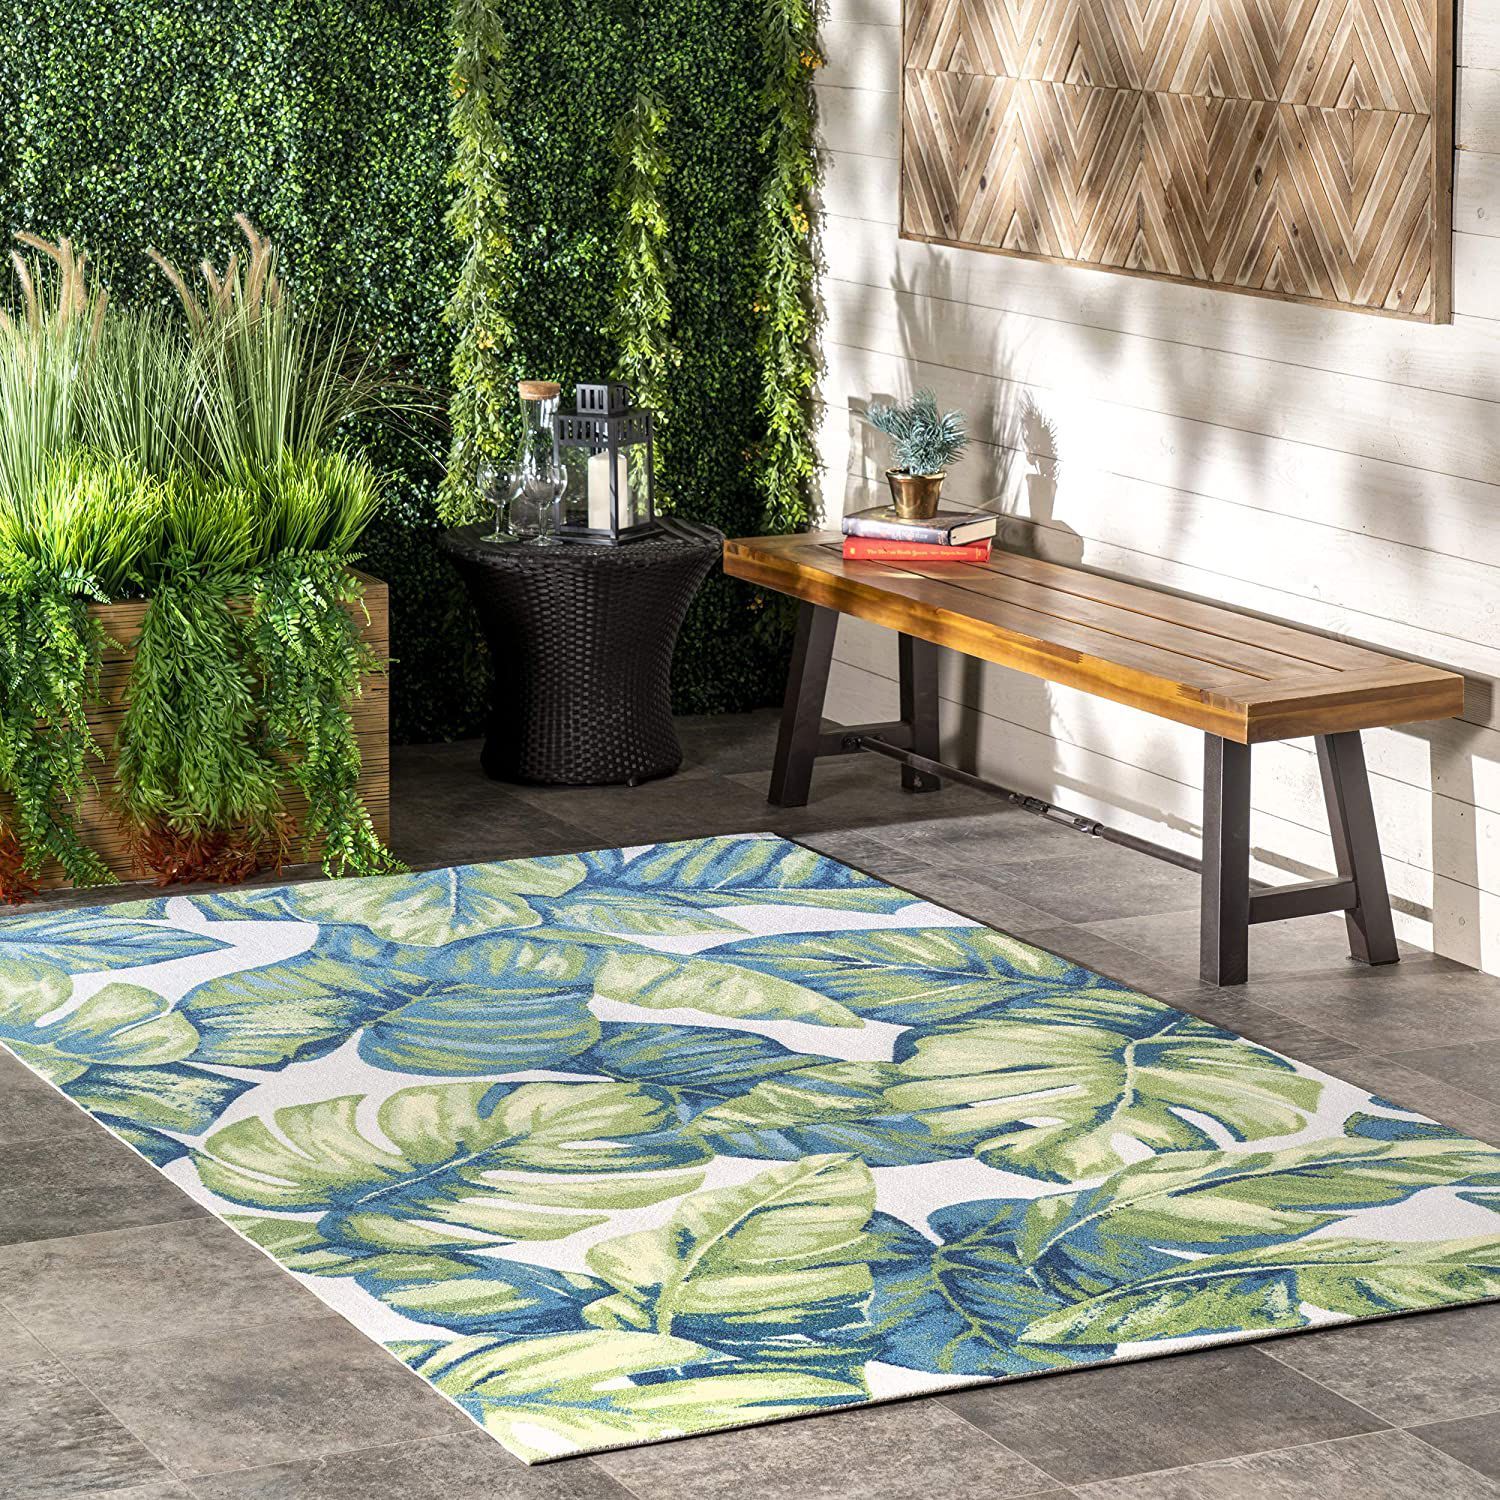 13 Best Outdoor Rugs You Can Buy On Amazon In 2021 With Regard To Outdoor Rugs (Photo 13 of 15)